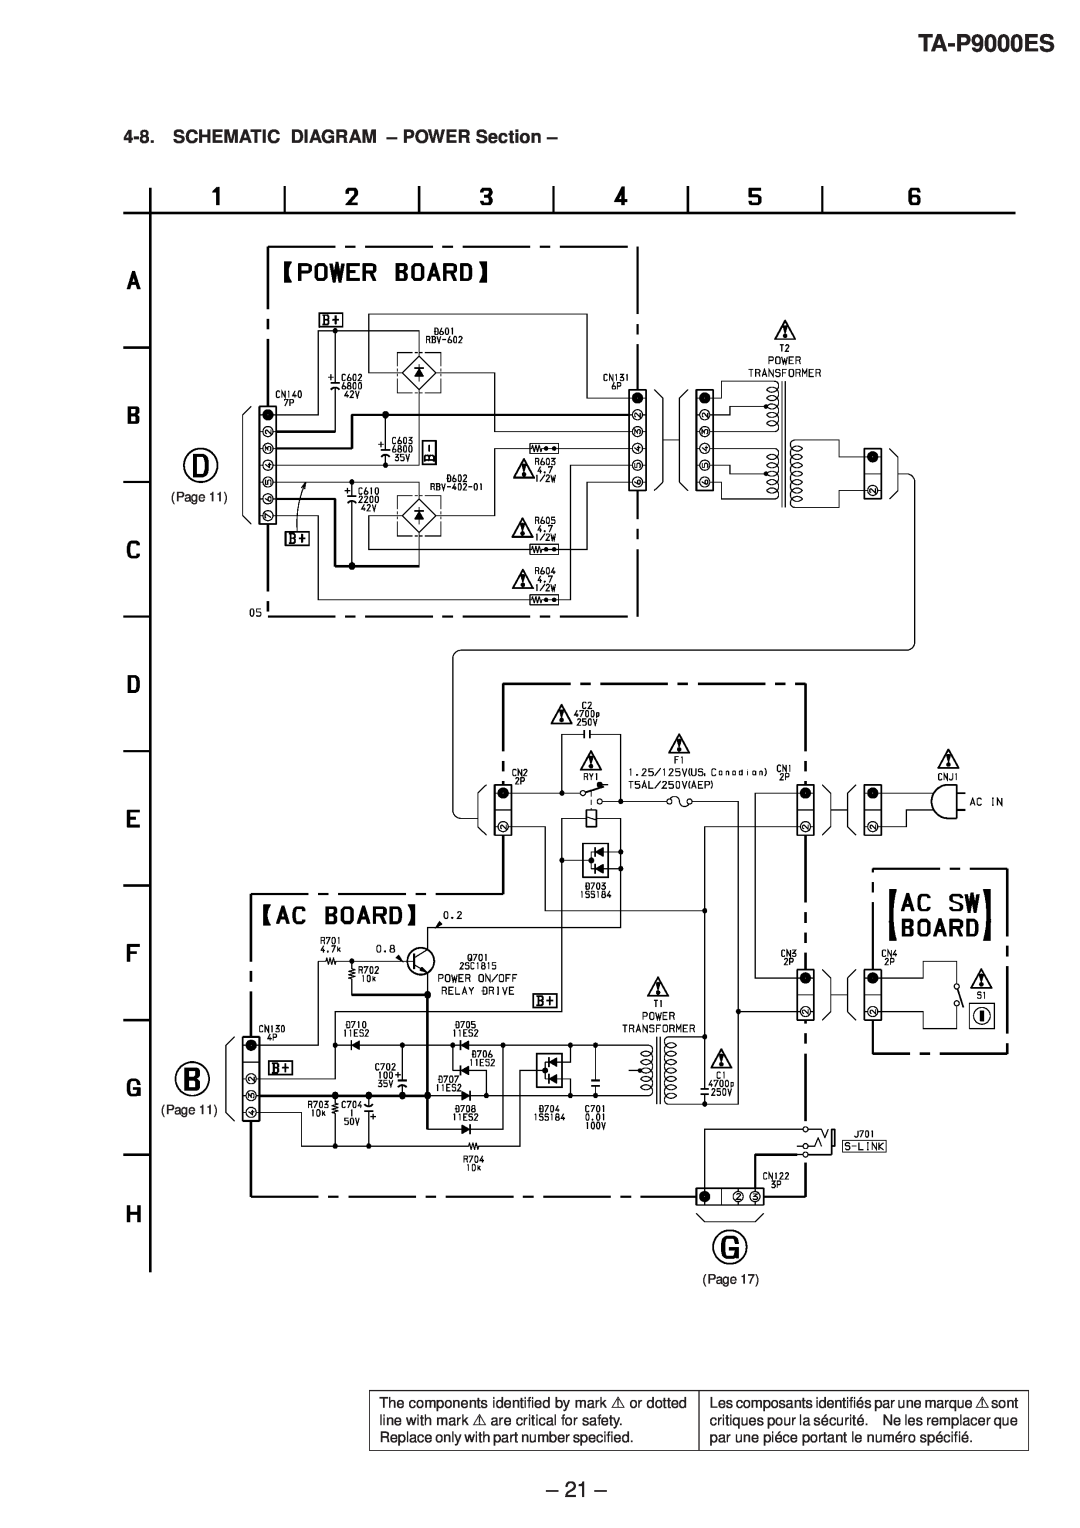 Sony TA-P9000ES service manual SCHEMATIC DIAGRAM - POWER Section 